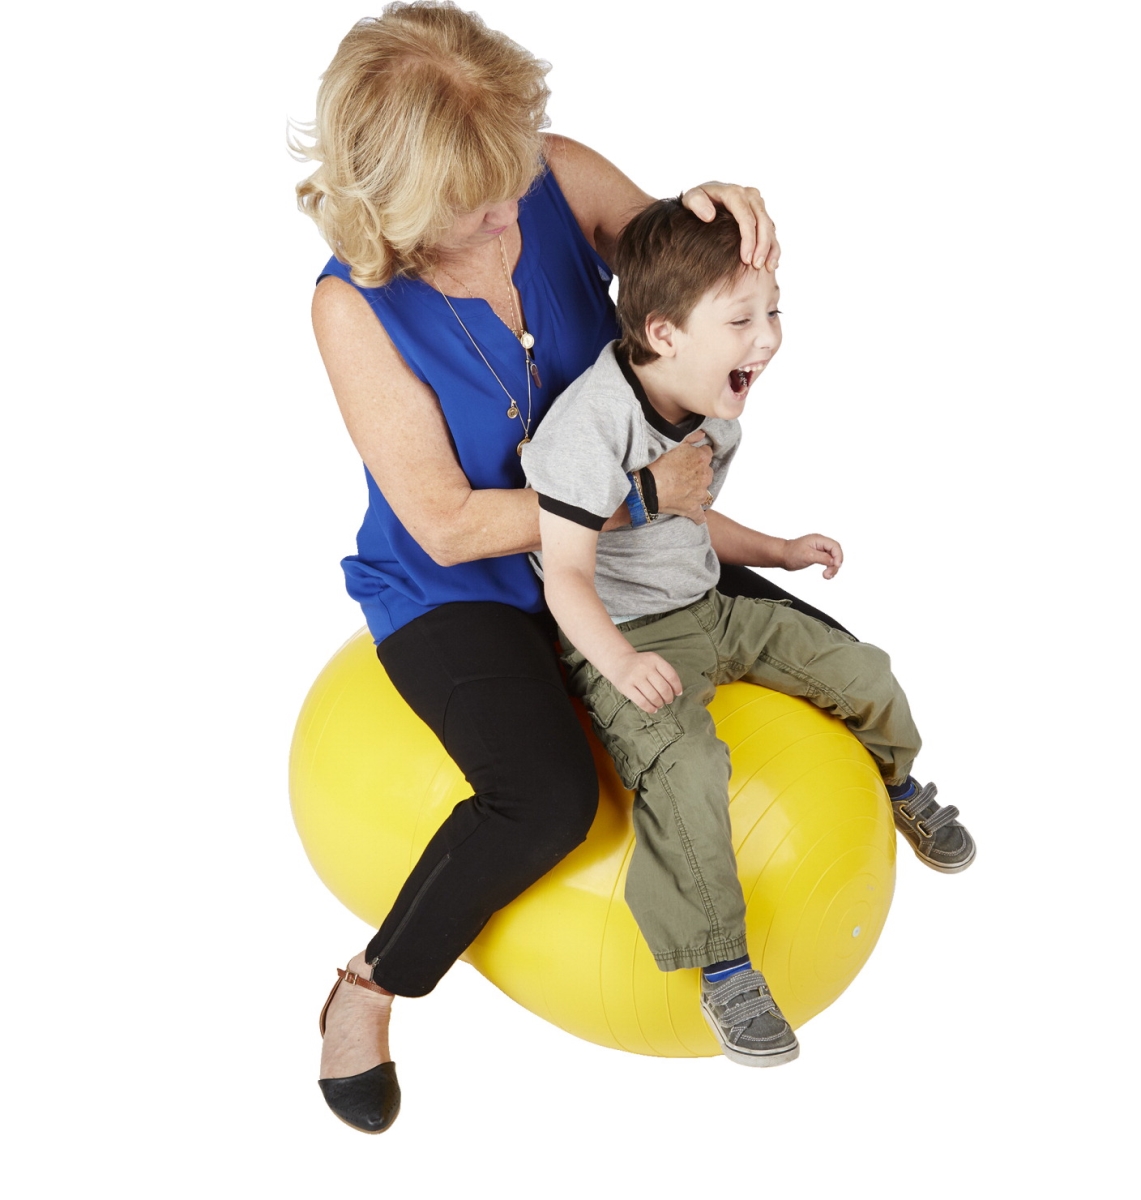 1004585 Gymnic 21.75 In. Physio-roll Ball, Yellow